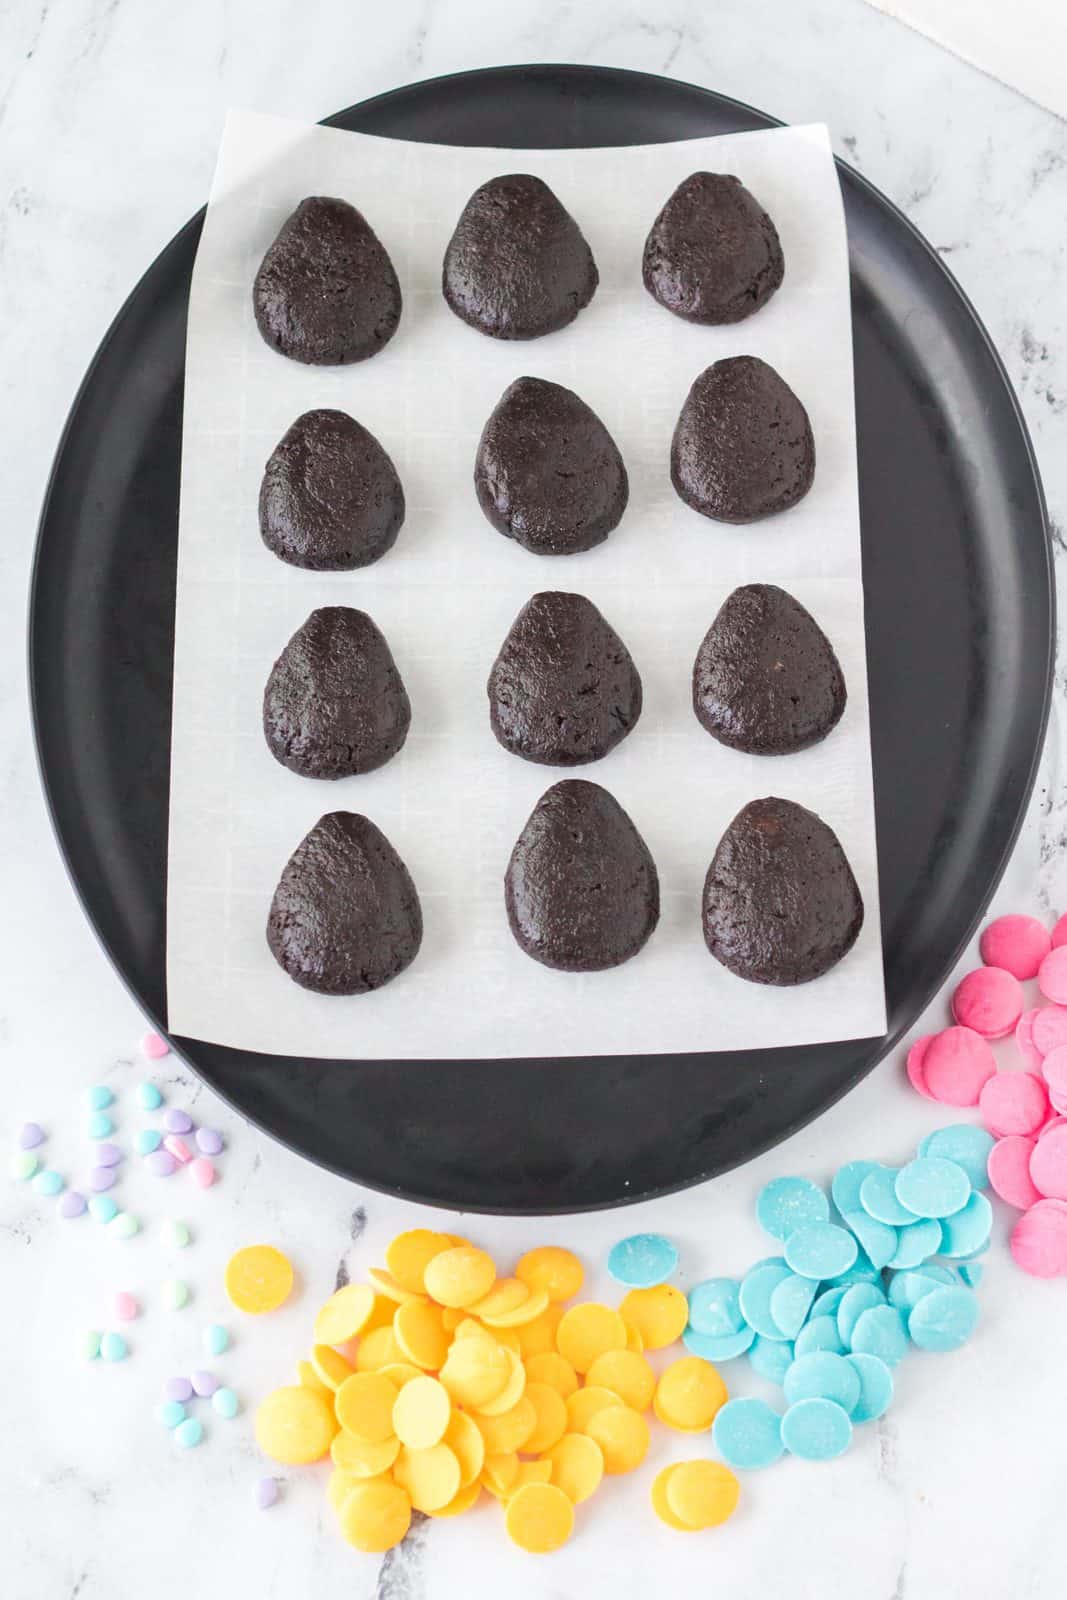 Oreos mixture portioned and shaped into eggs.